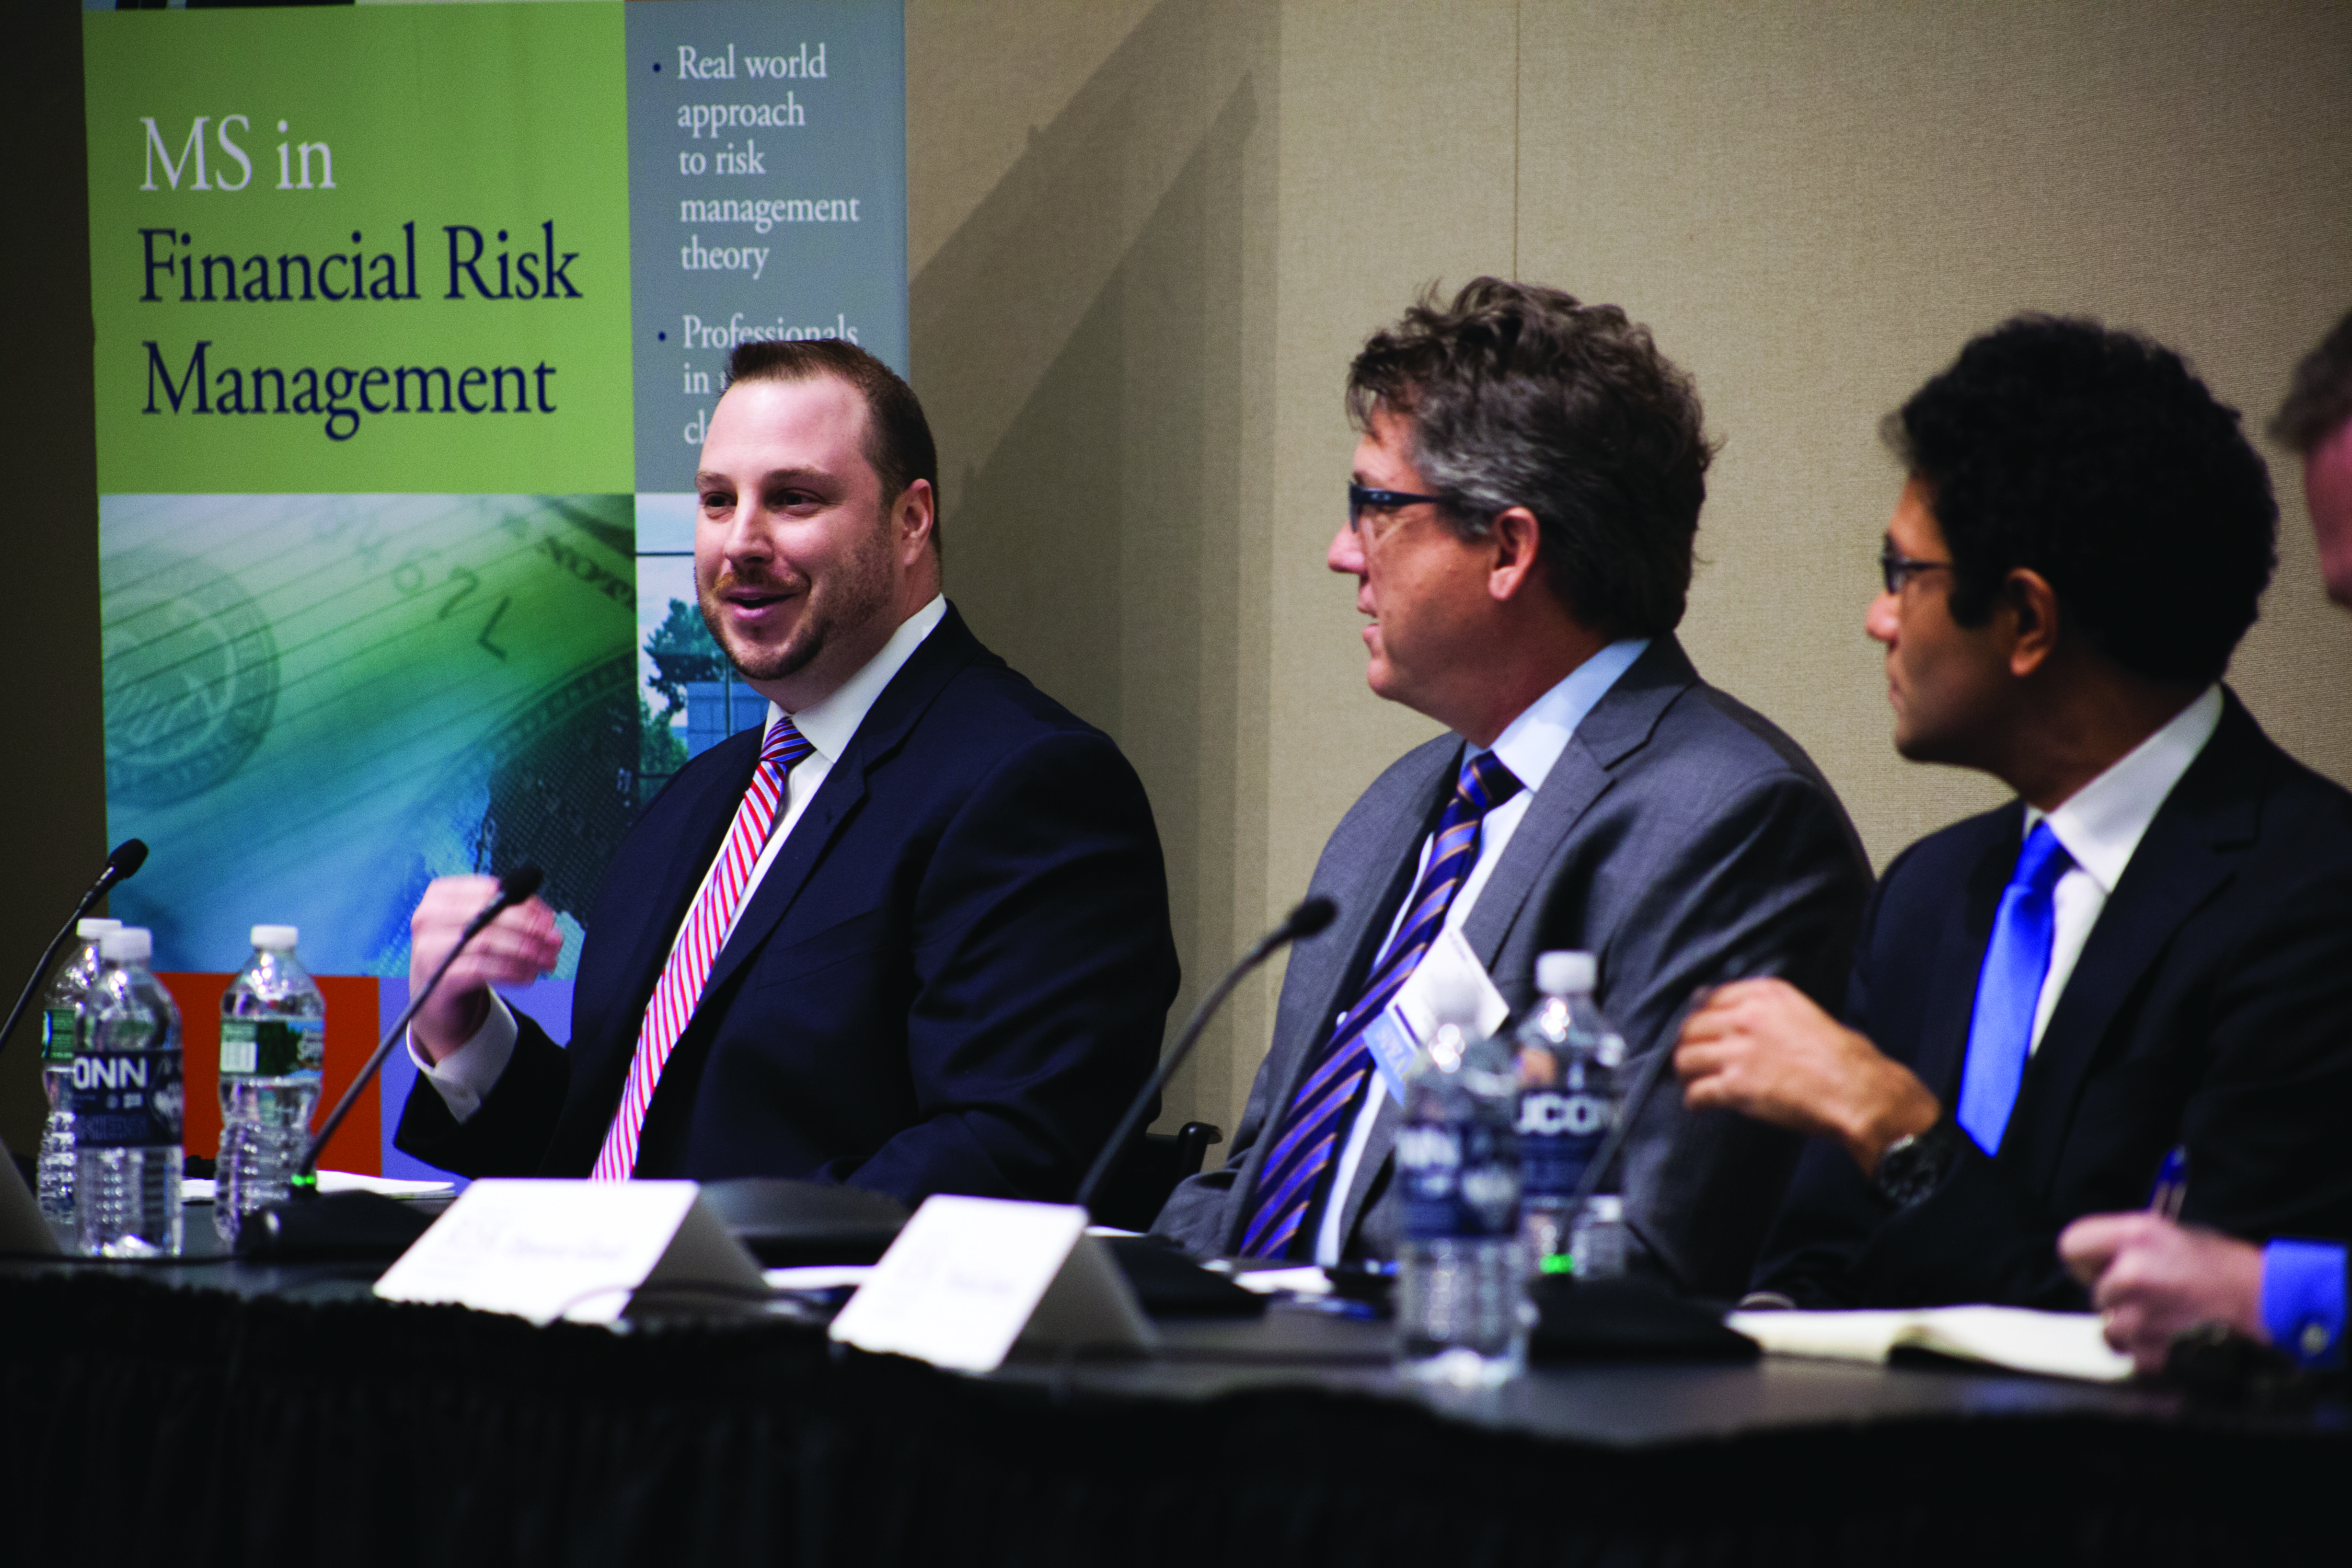 SVP Chief Risk and Chief Credit Officer John Bonora of First County Bank speaks on a panel at the 2015 Connecticut Risk Management Conference, which brings together industry professionals and faculty experts to discuss various aspects of risk.